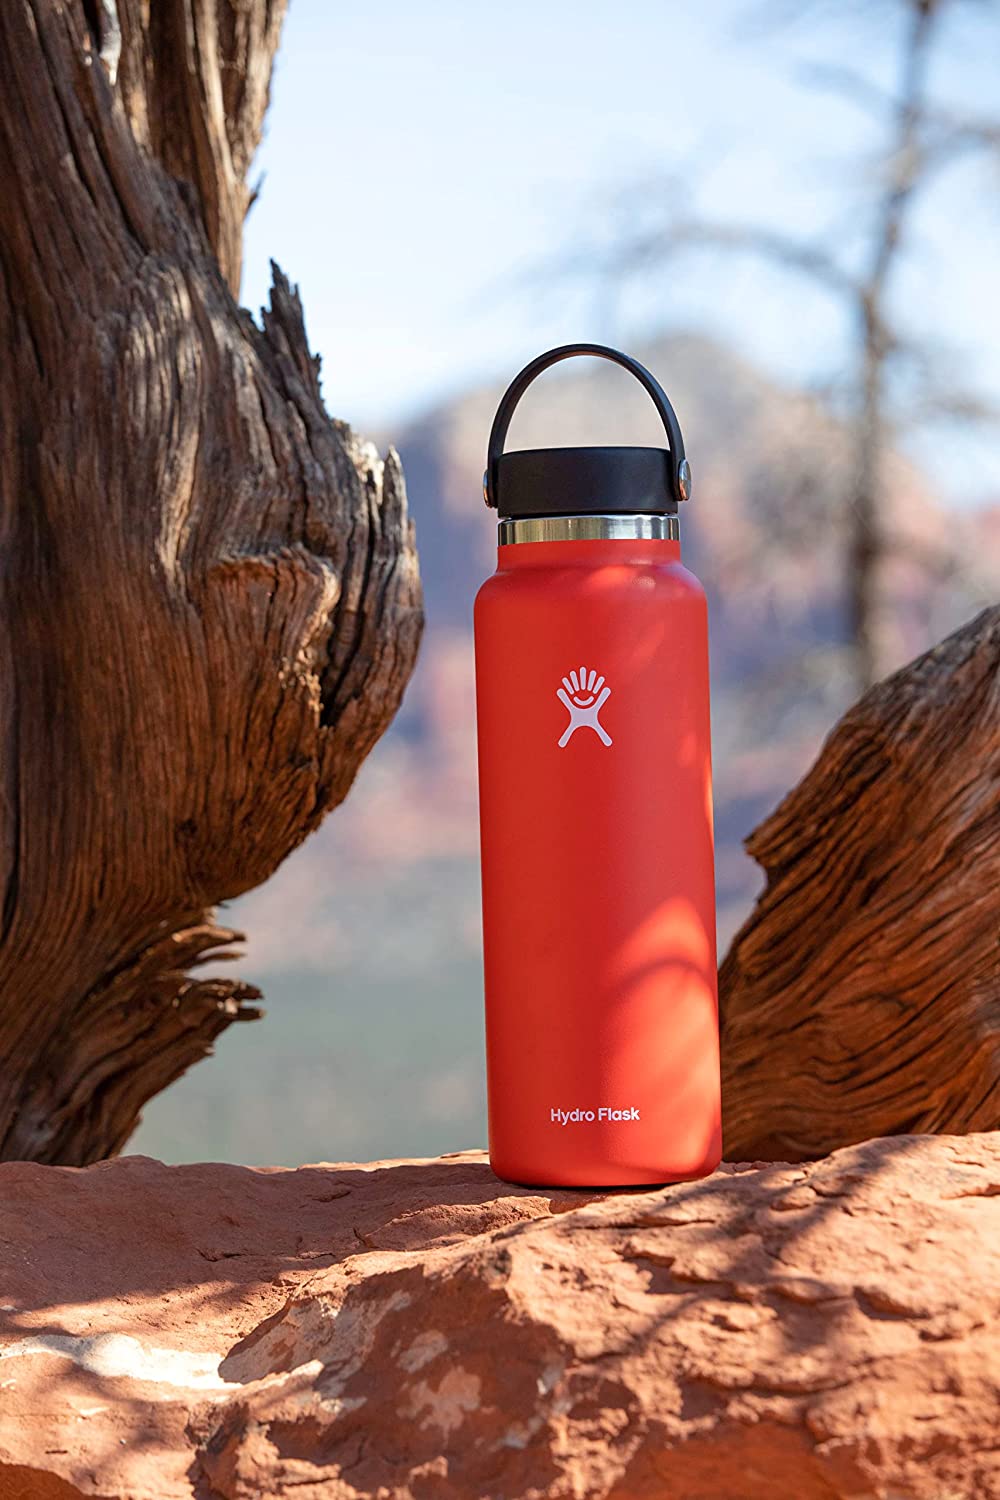 Hydroflask Wide Mouth Bottle